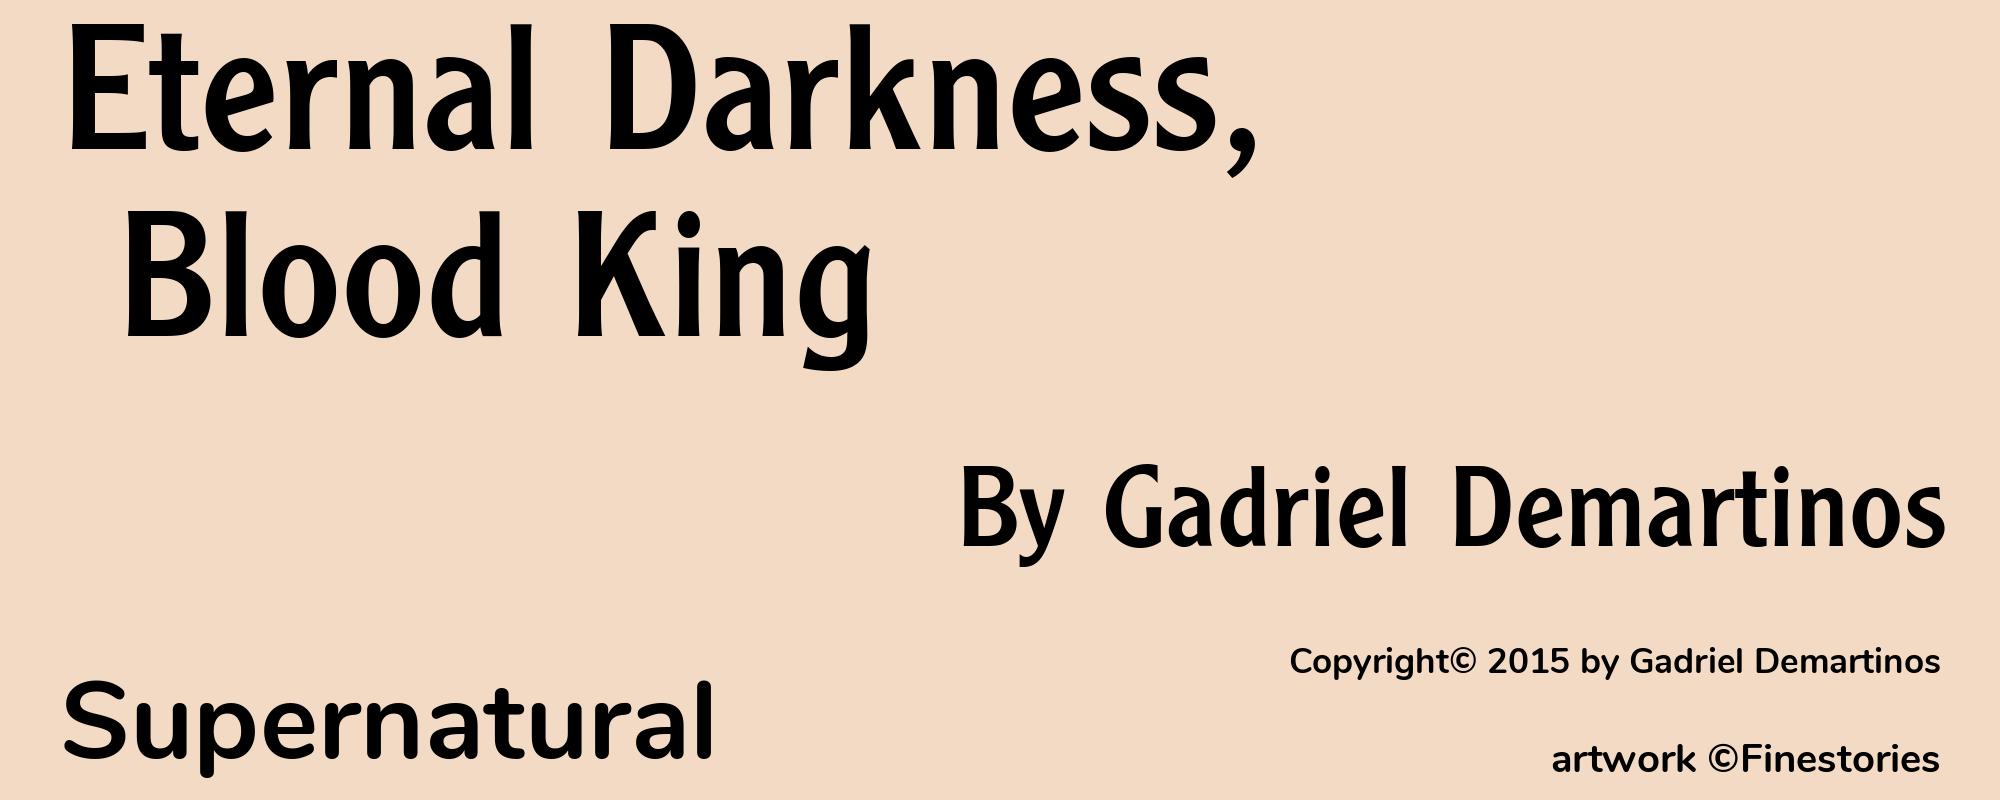 Eternal Darkness, Blood King - Cover